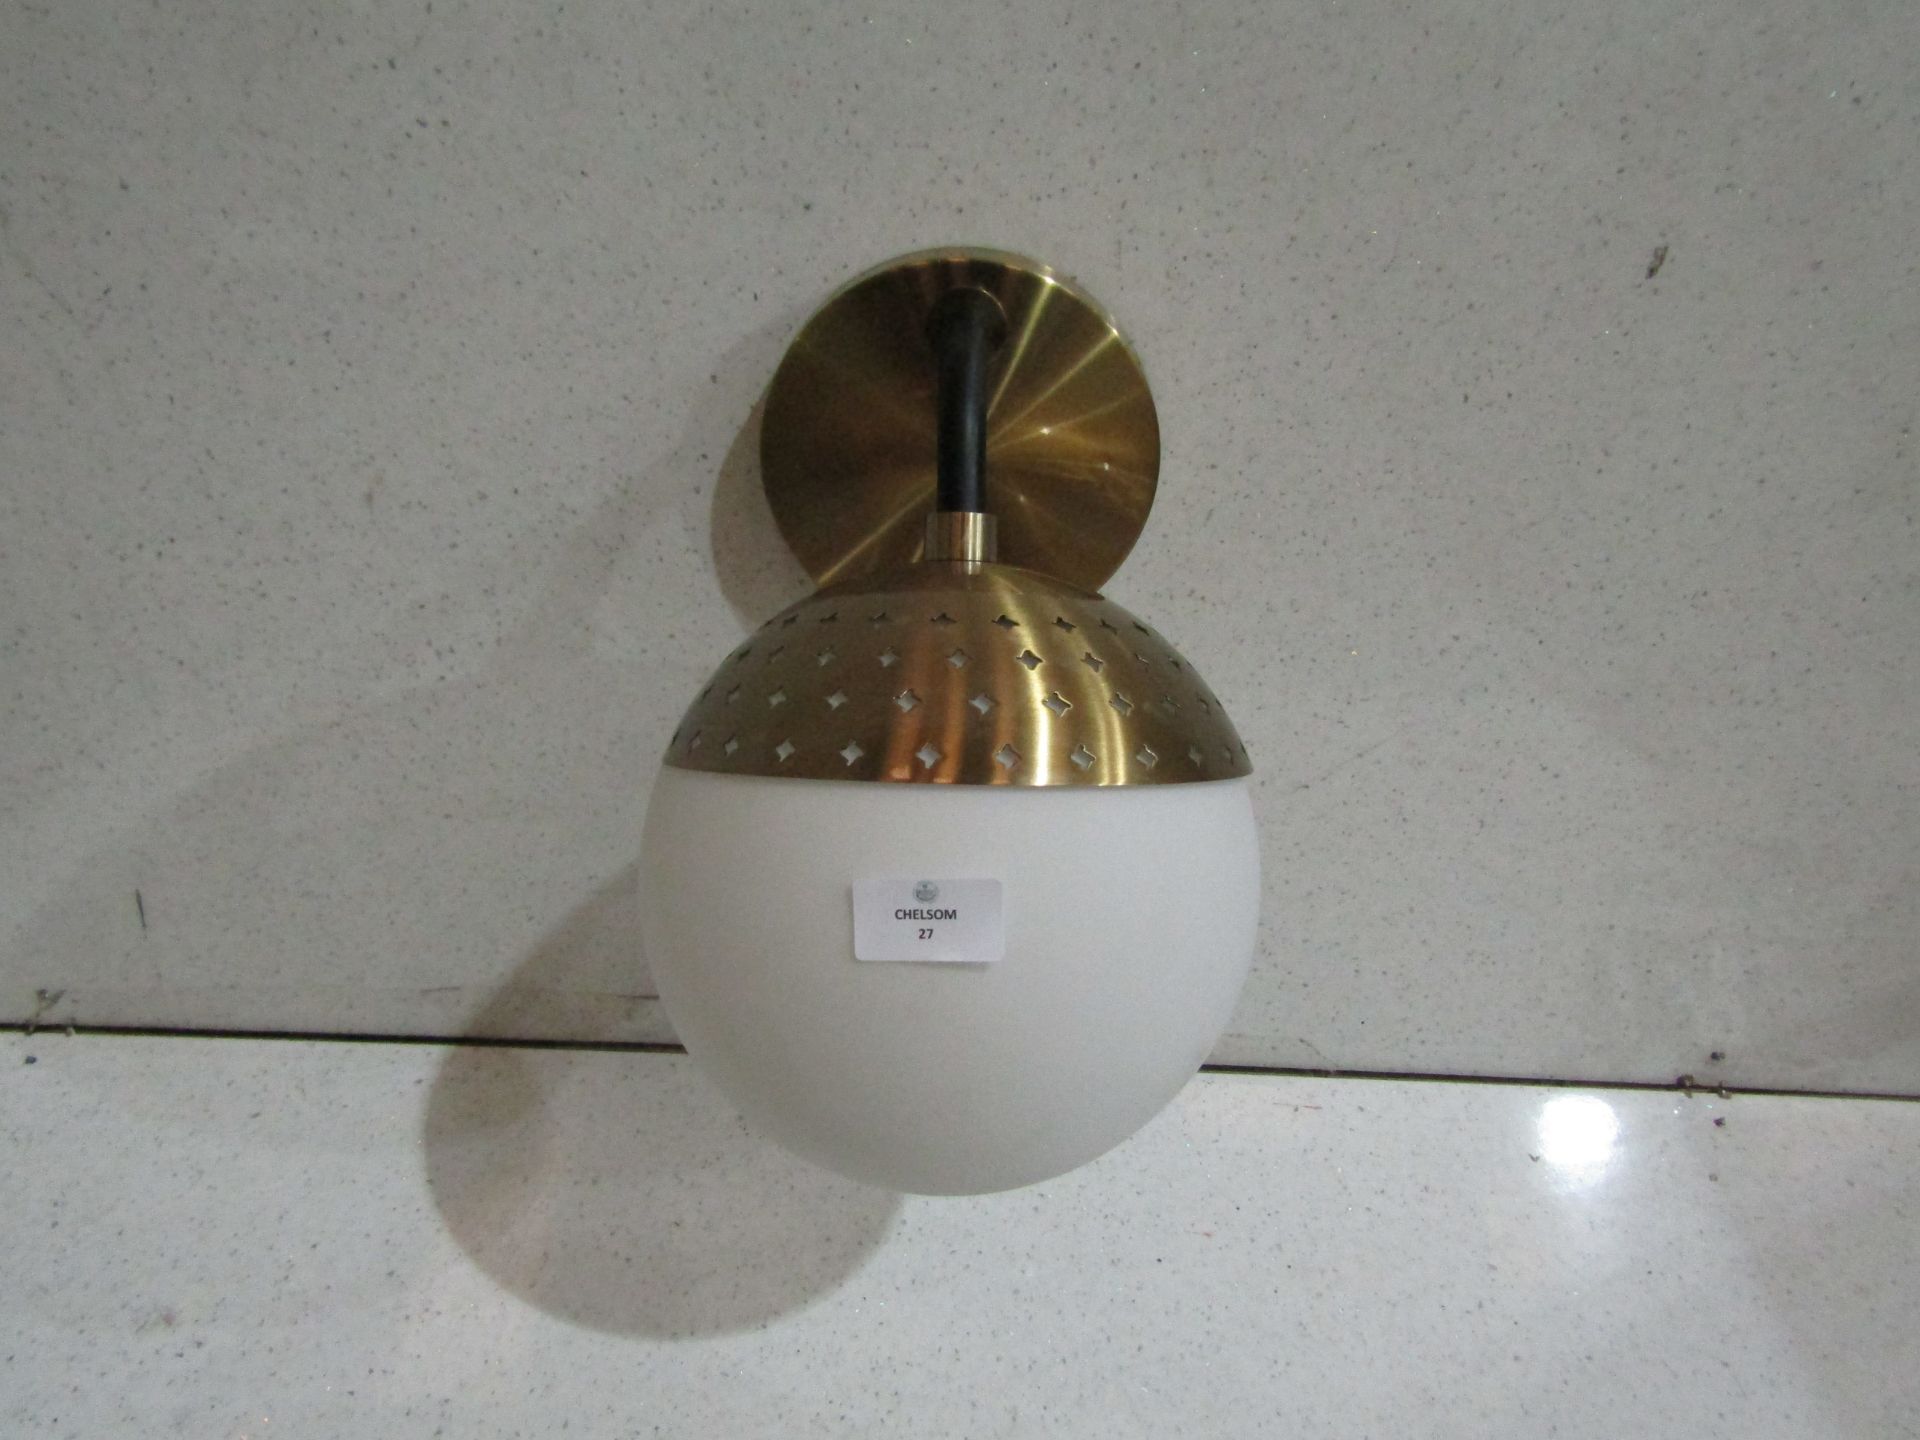 Chelsom - Brass & Black Glass Orb Wall Light - Good Condition.